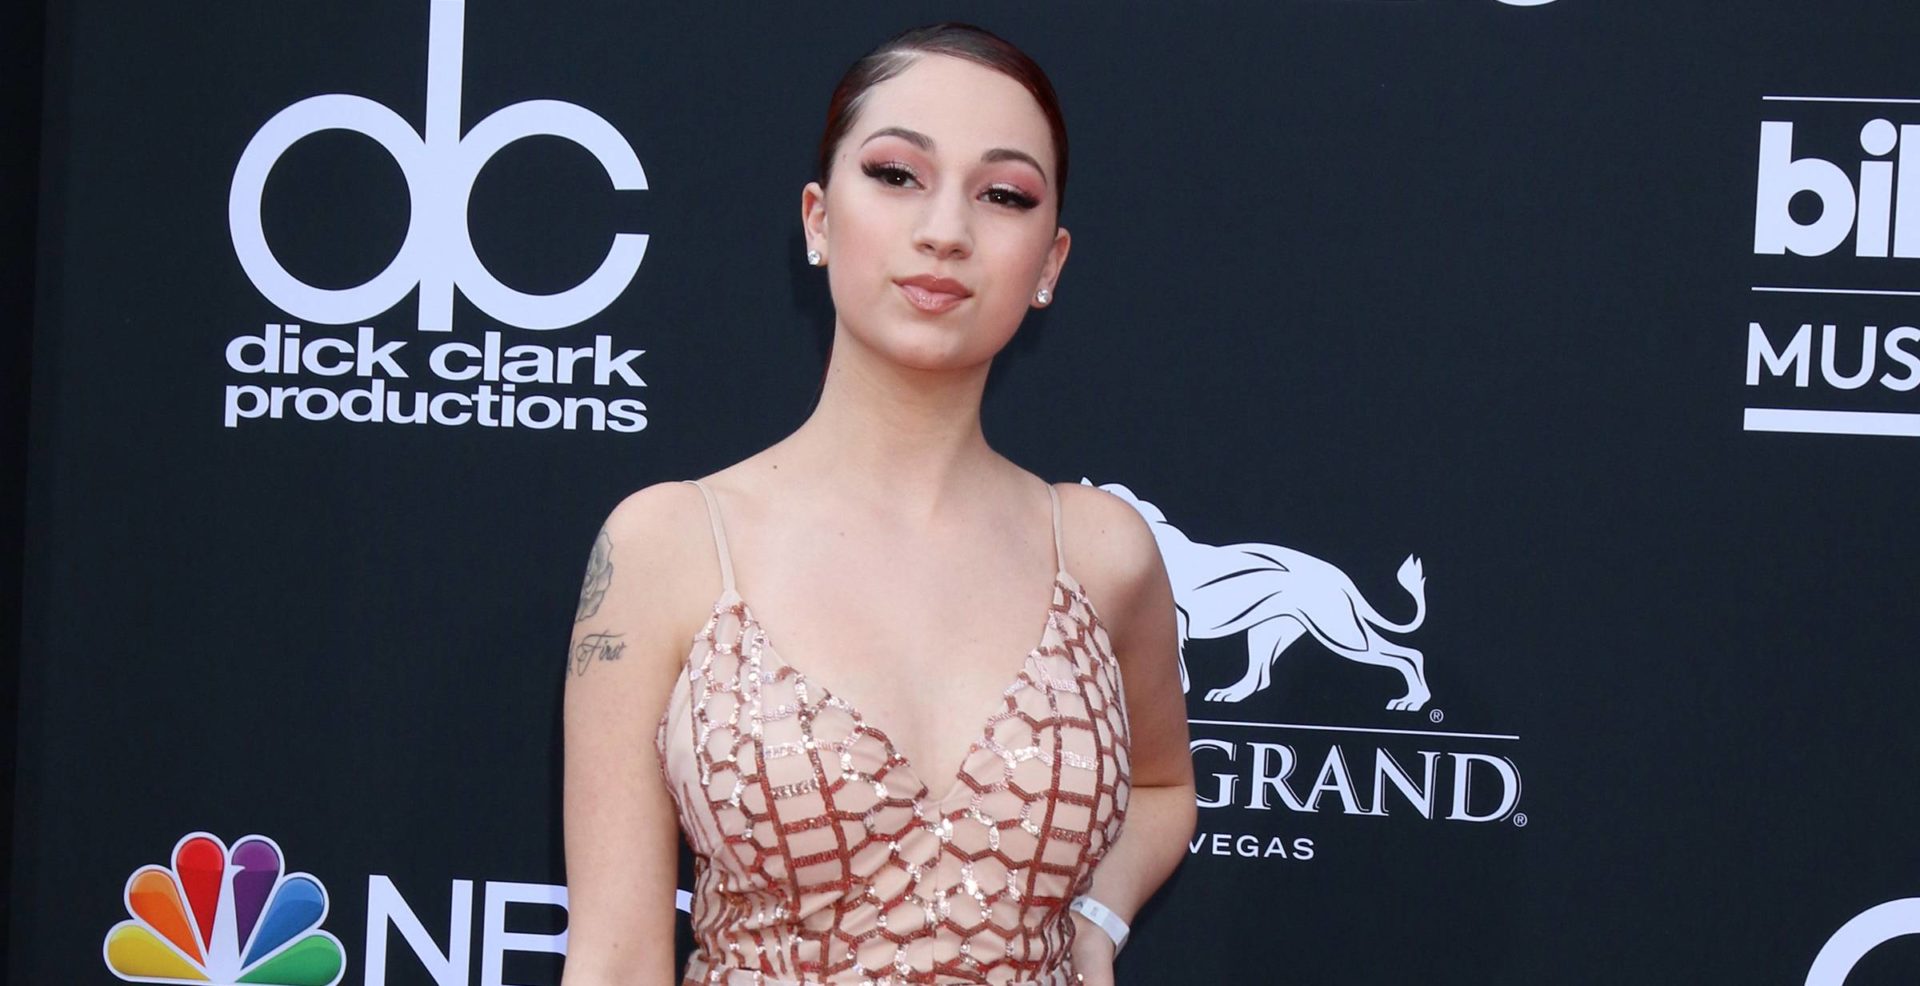 Bhad Bhabie Claims Dr. Phil Show Sent Her to a Torture Camp.